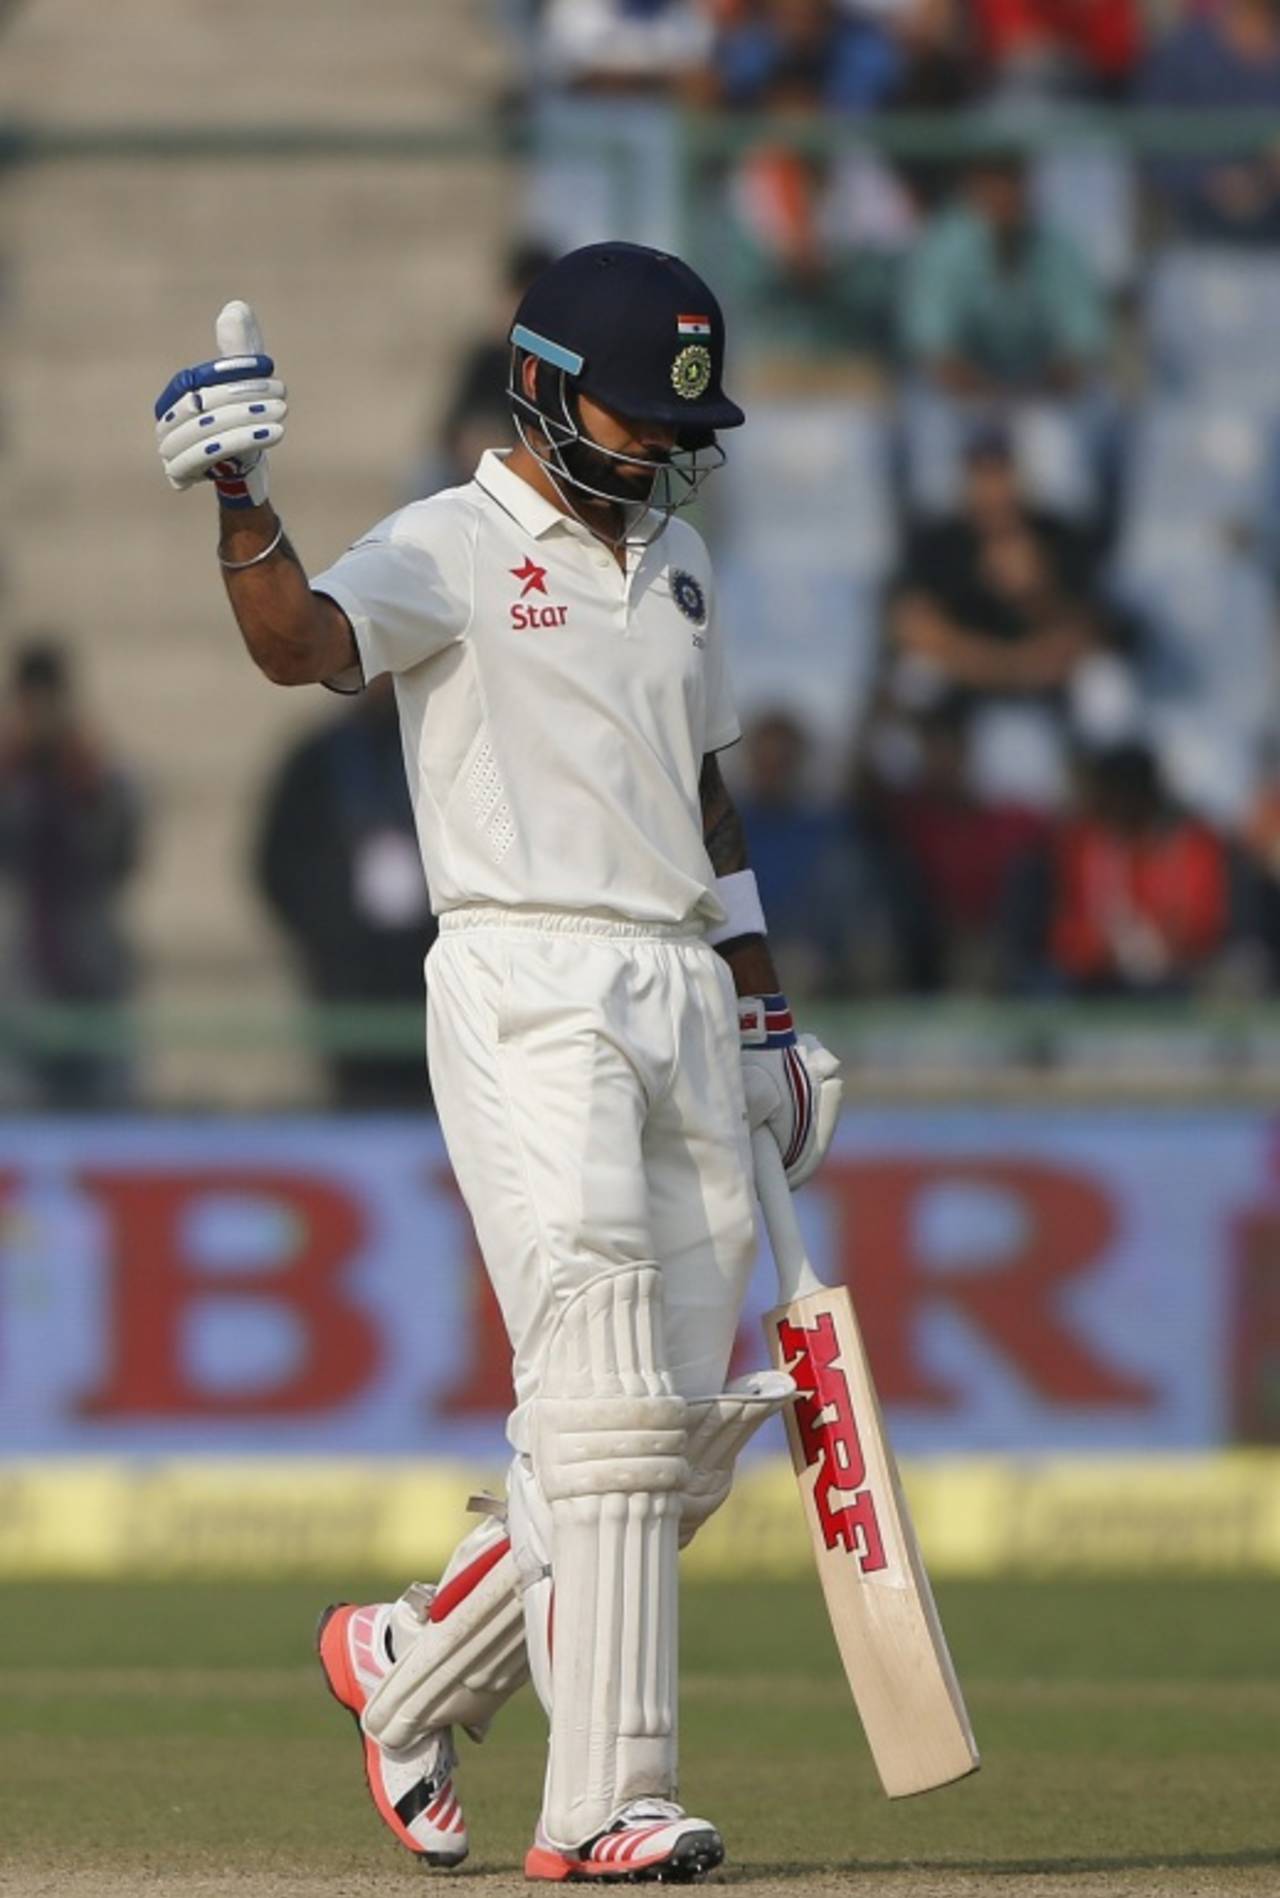 Virat Kohli acknowledges the cheers after reaching his first fifty in the series, India v South Africa, 4th Test, Delhi, 3rd day, December 5, 2015